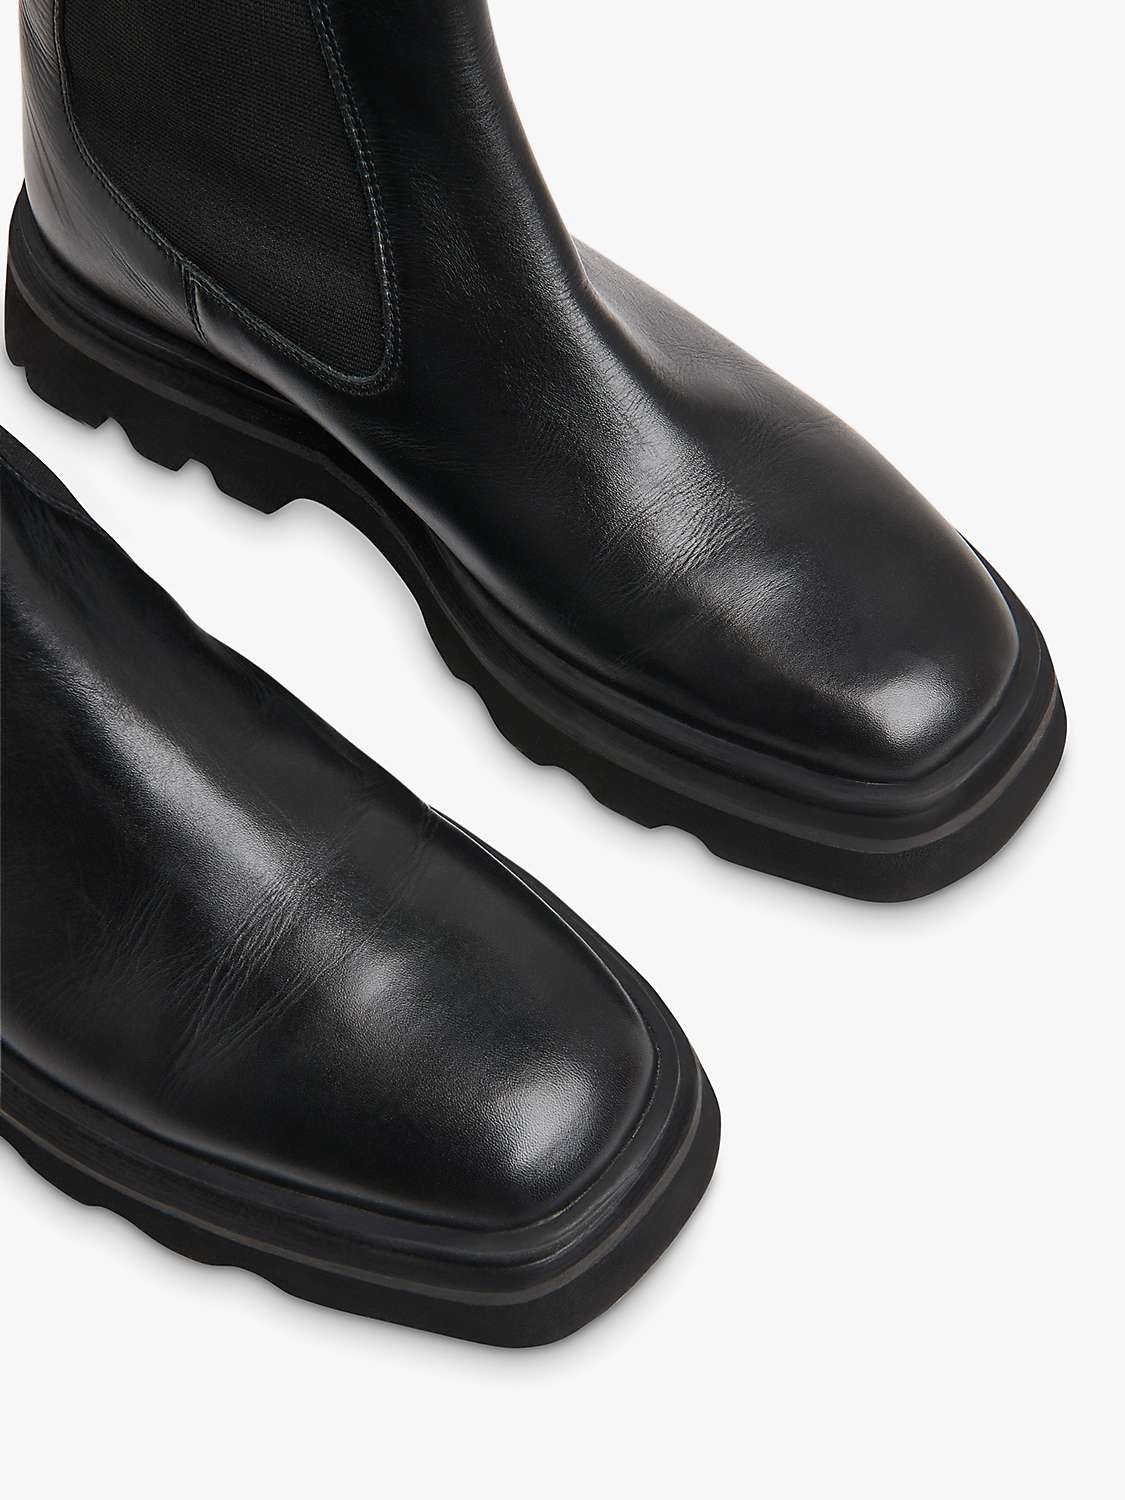 Buy Whistles Kenton Square Toe Leather Boots, Black Online at johnlewis.com